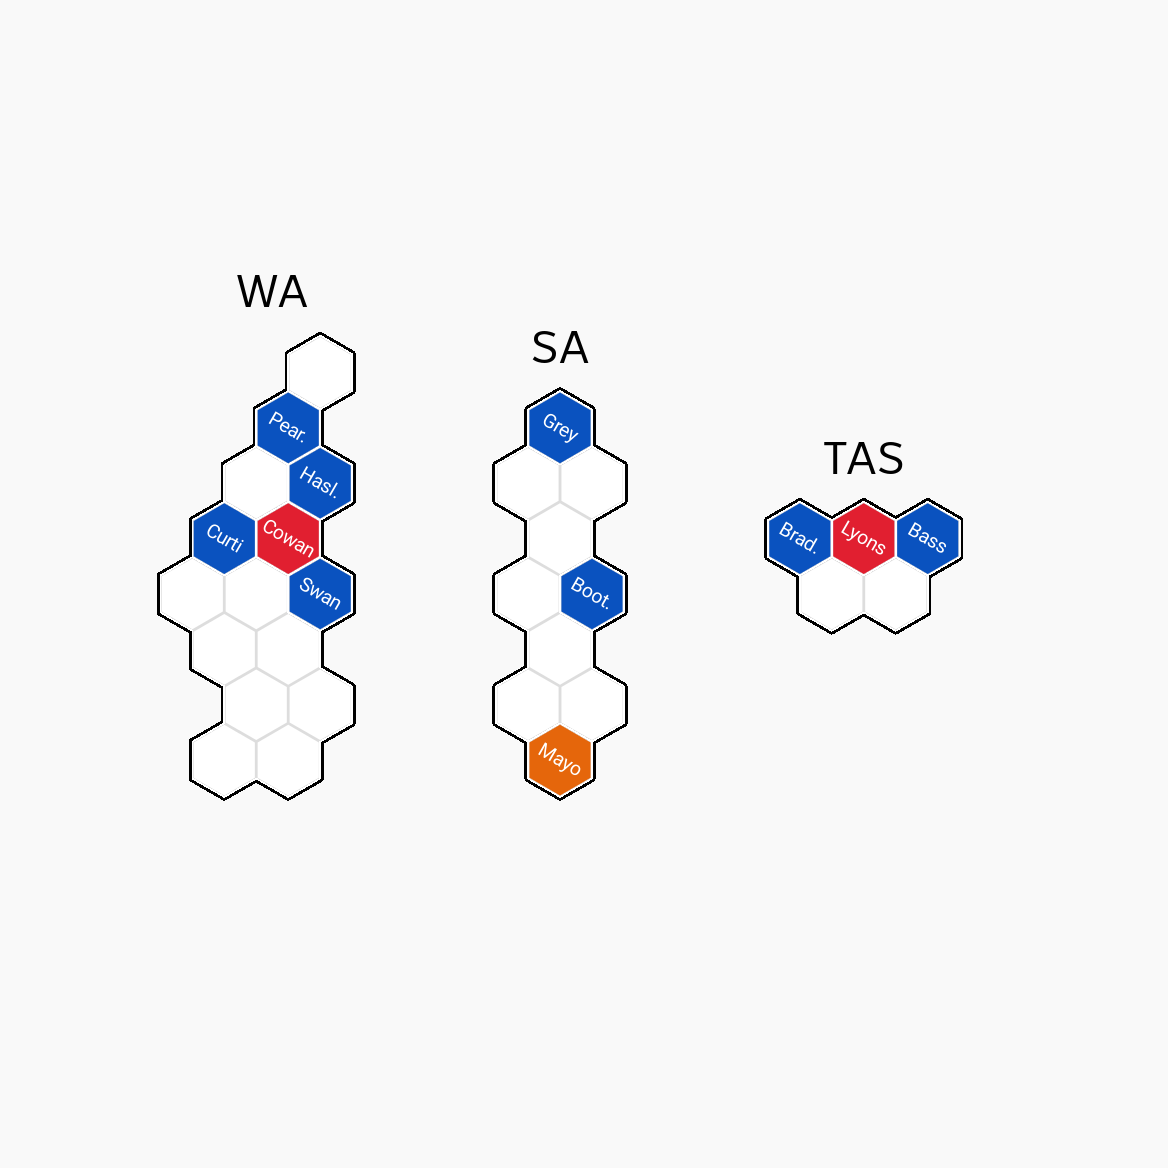 A white map of WA, SA and Tas divided up into hexagonal shapes, with some of the shaped coloured in red, blue or orange.